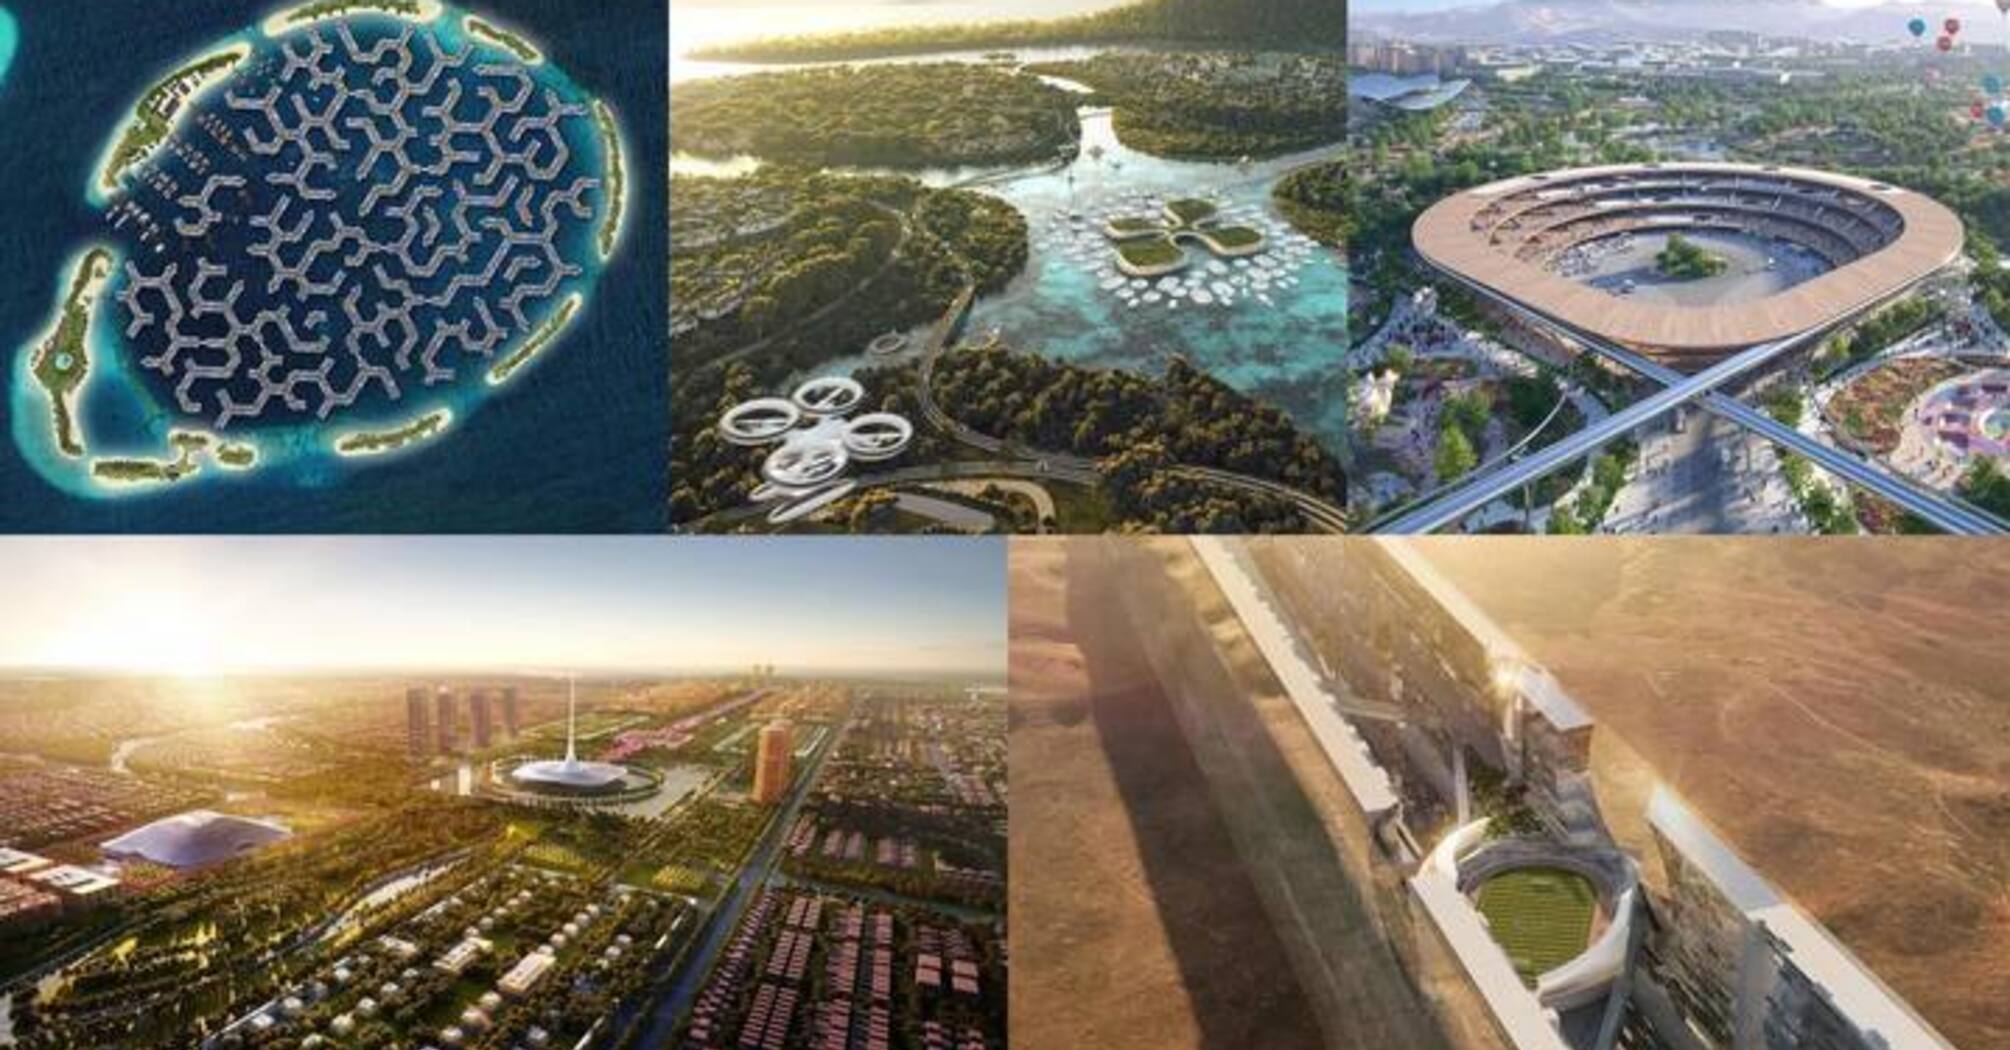 From flying cars to floating cities: what futuristic places are being built